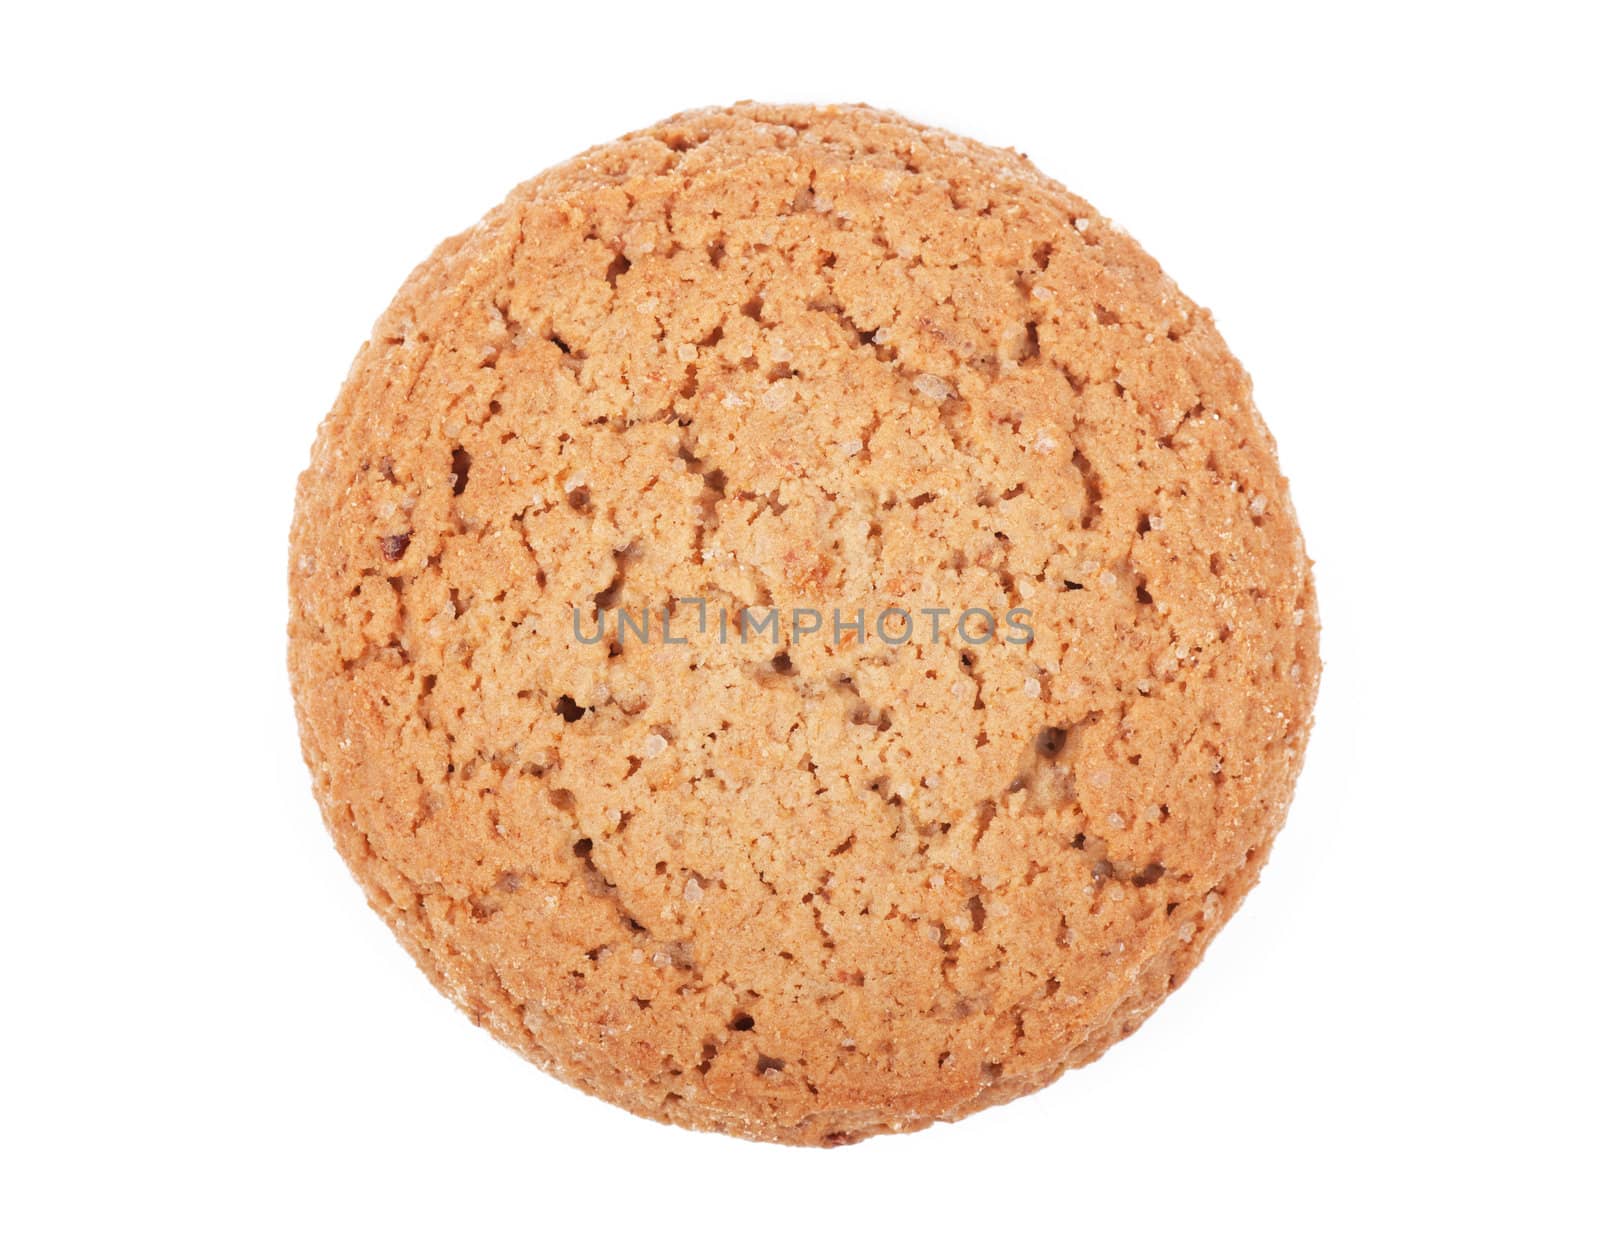 Closeup view of round oat cookie on the white background